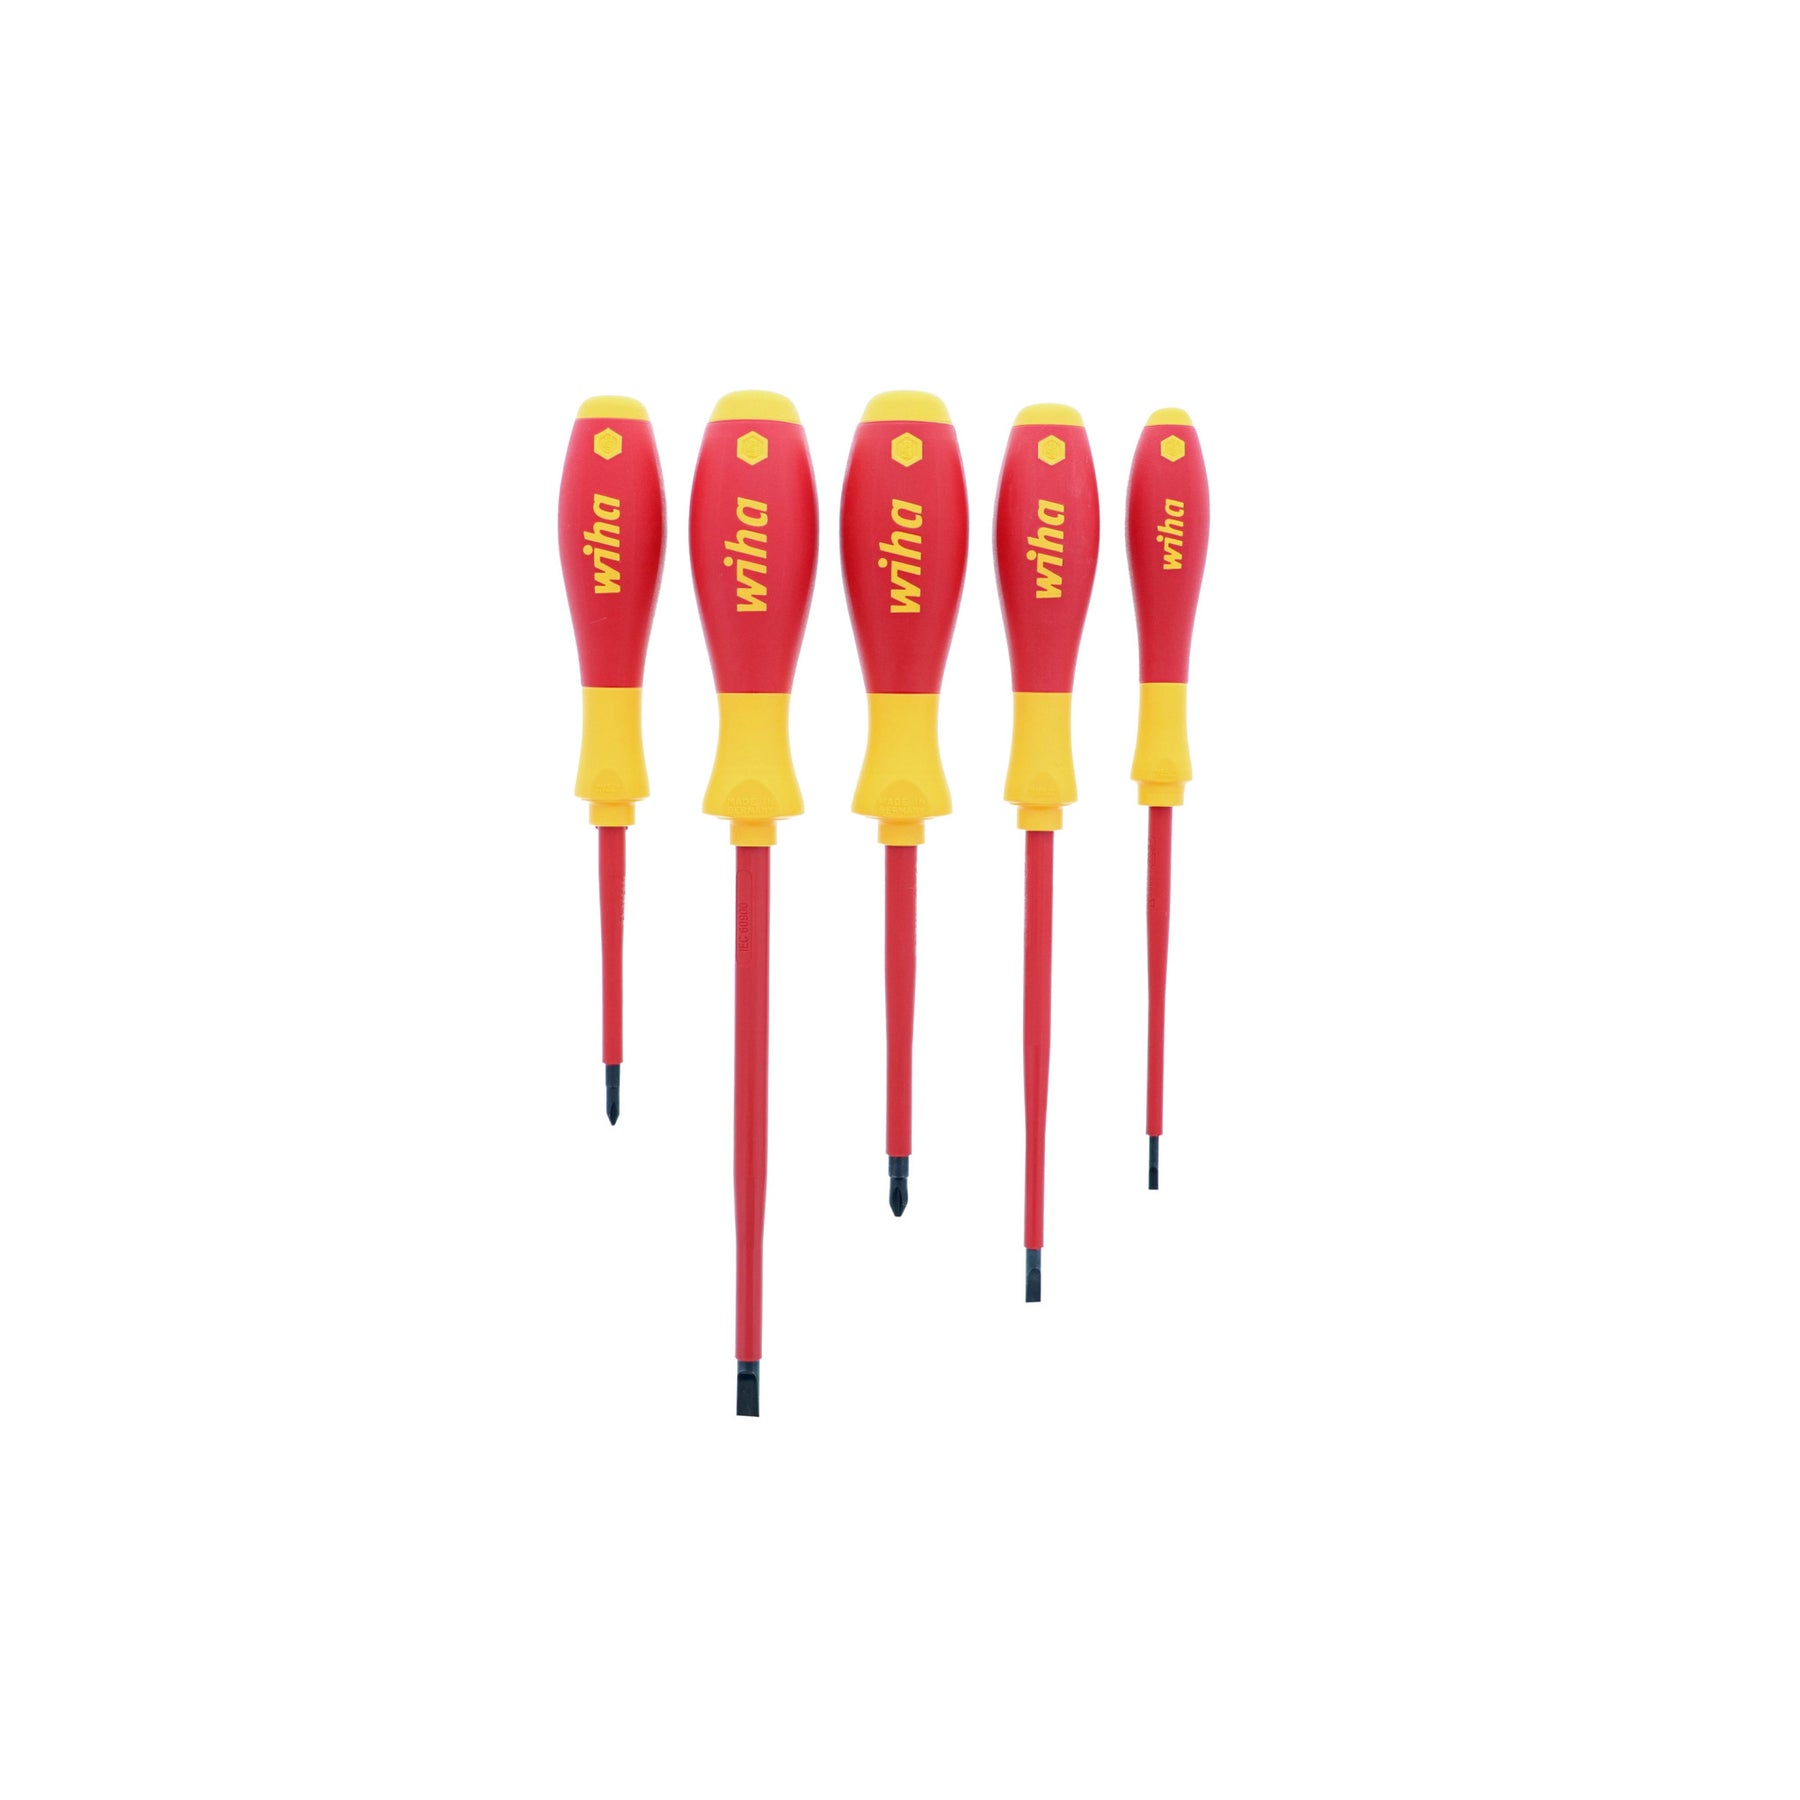 Wiha 32091 Insulated Slotted & Phillips 5 Pc. Set Made in Germany